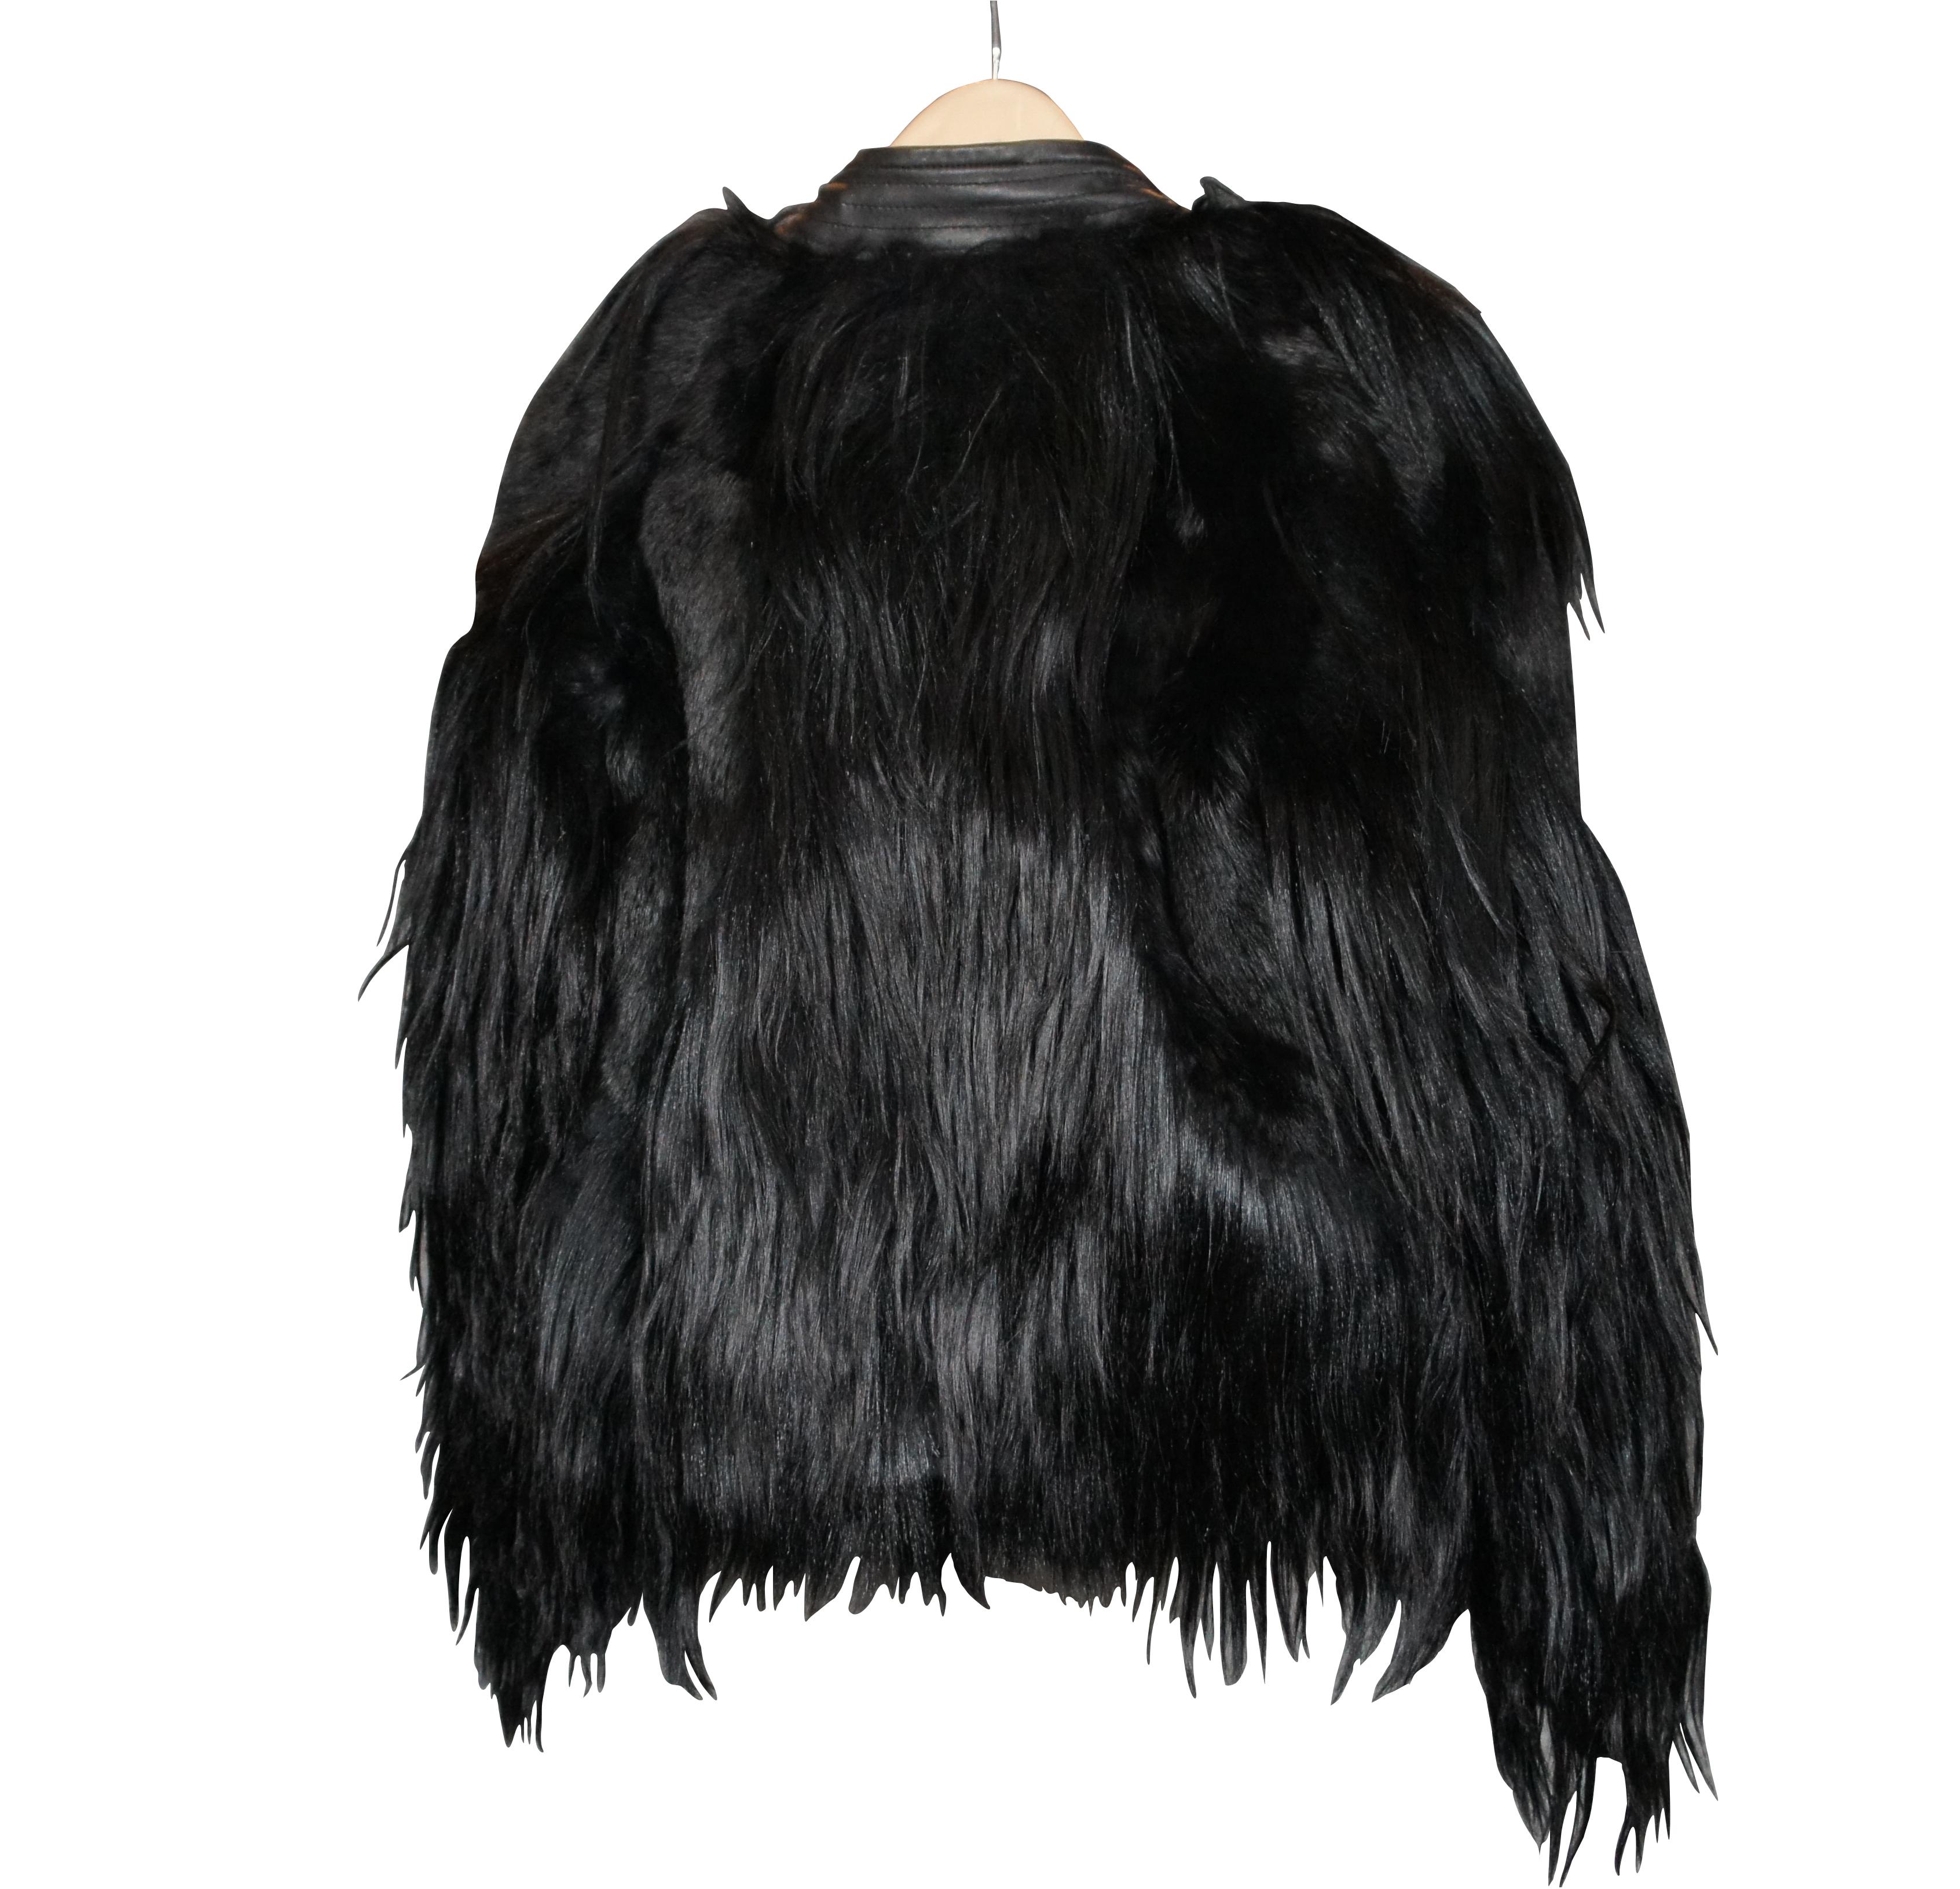 Stunning Elizabeth and James women’s black fur and leather jacket featuring alternating sections of genuine long haired goat fur, rabbit fur and lamb leather. Full zip closure.